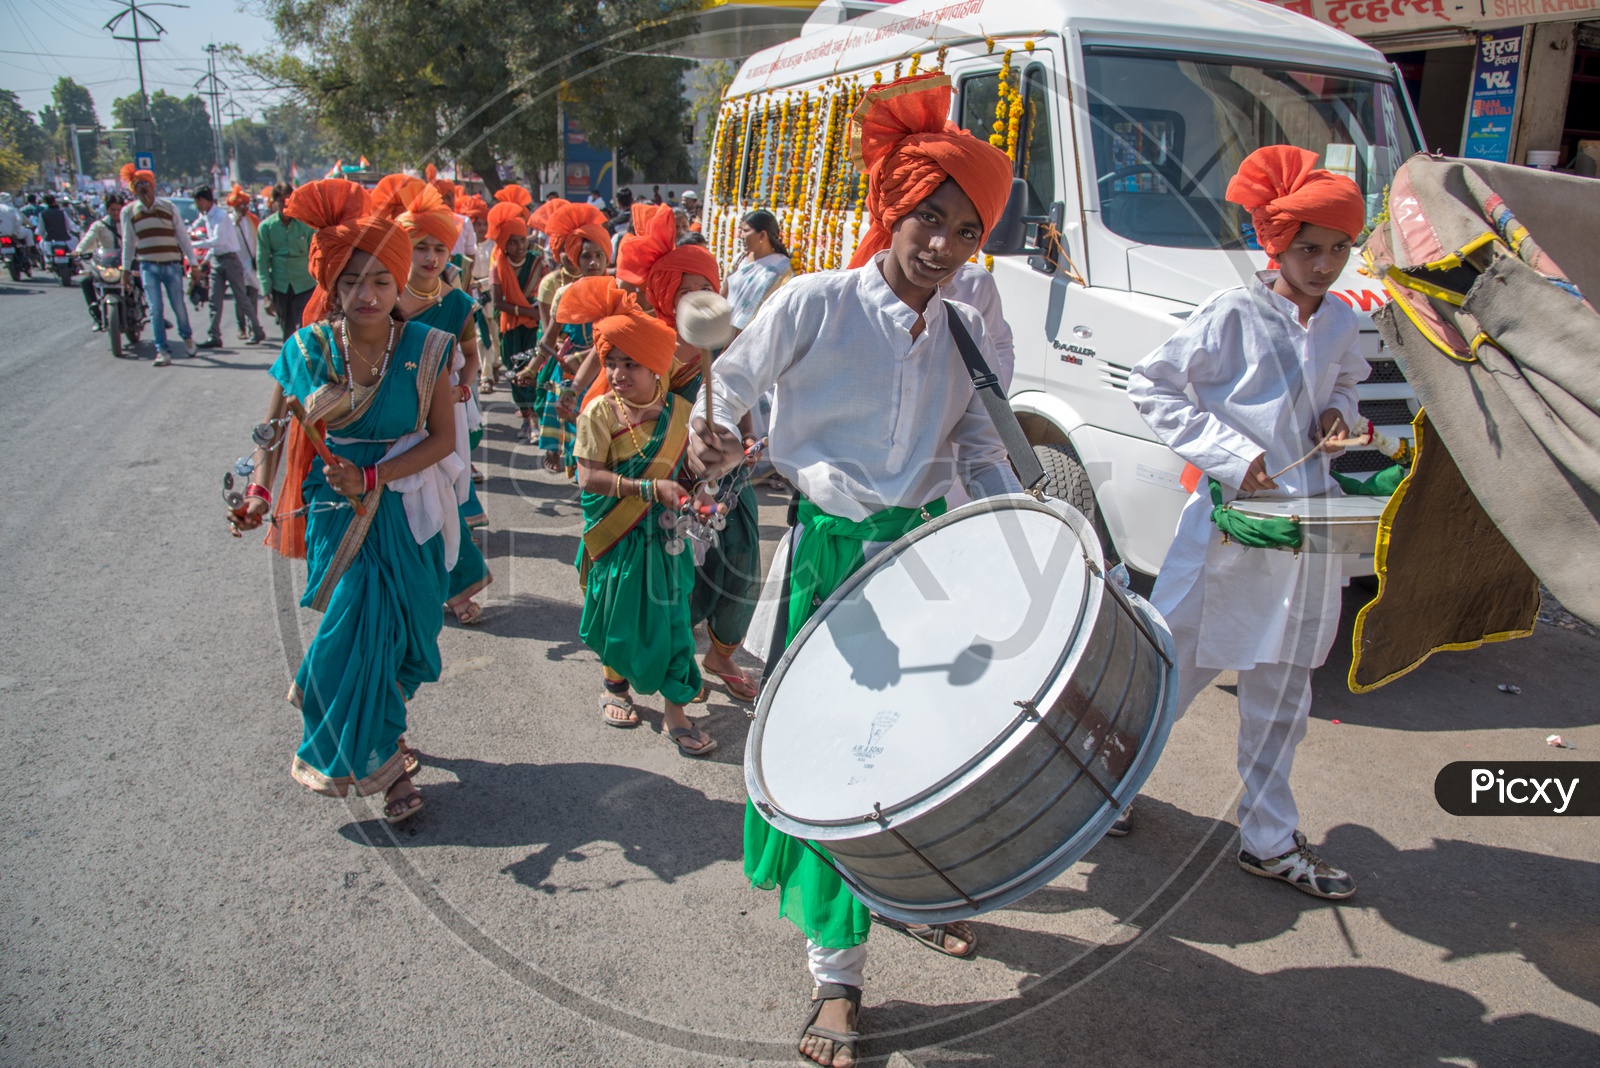 An Indian Drum Artist Playing Drums In a Road Rally On the Occasion Of Republic Day